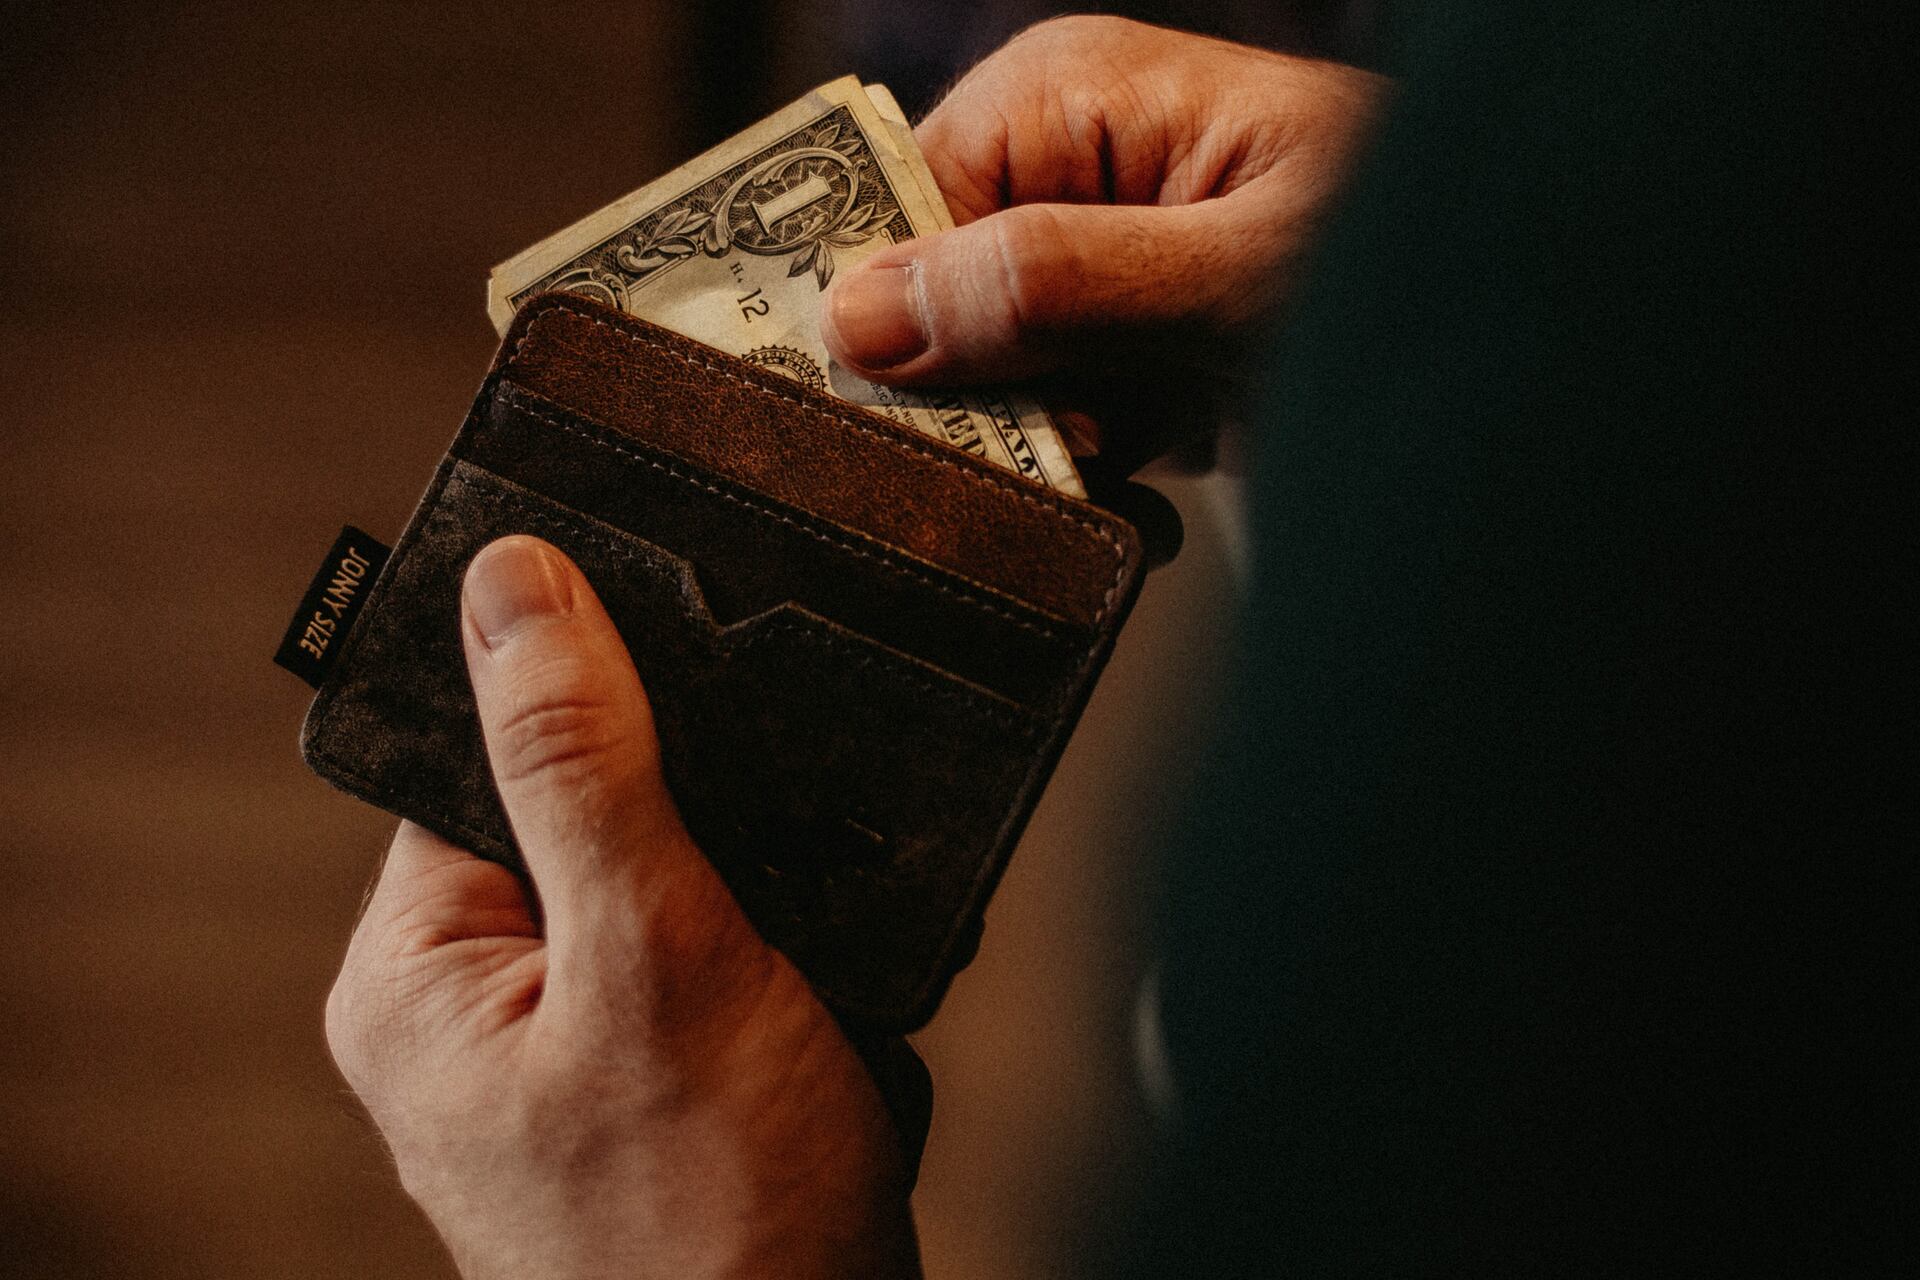  A wallet with money